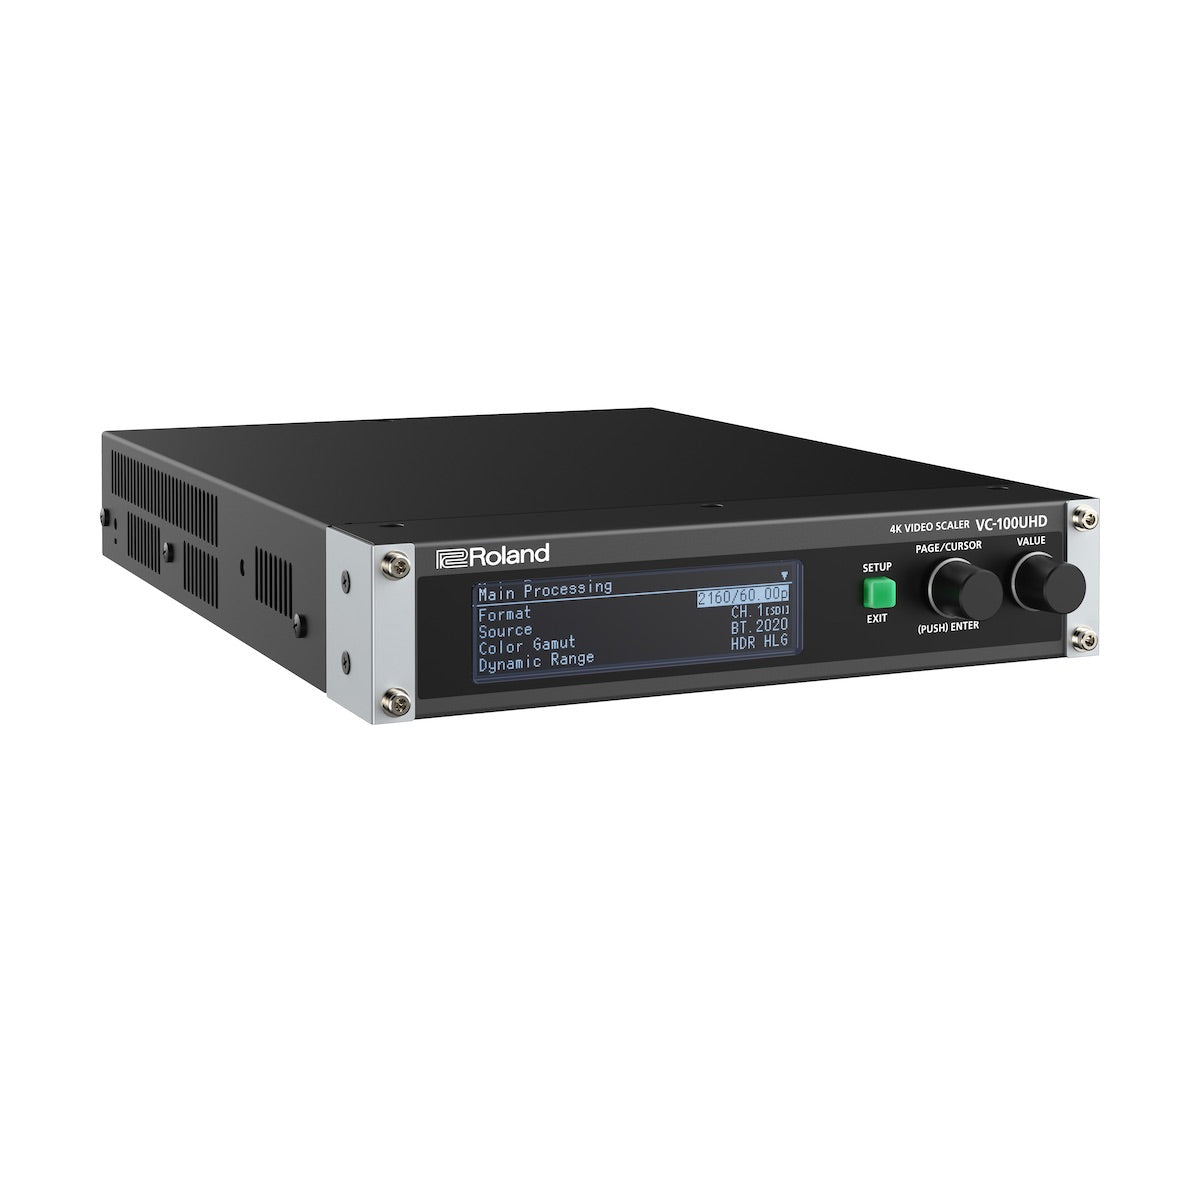 Roland VC-100UHD - 4K Video Scaler, Converter, and Streamer, front left